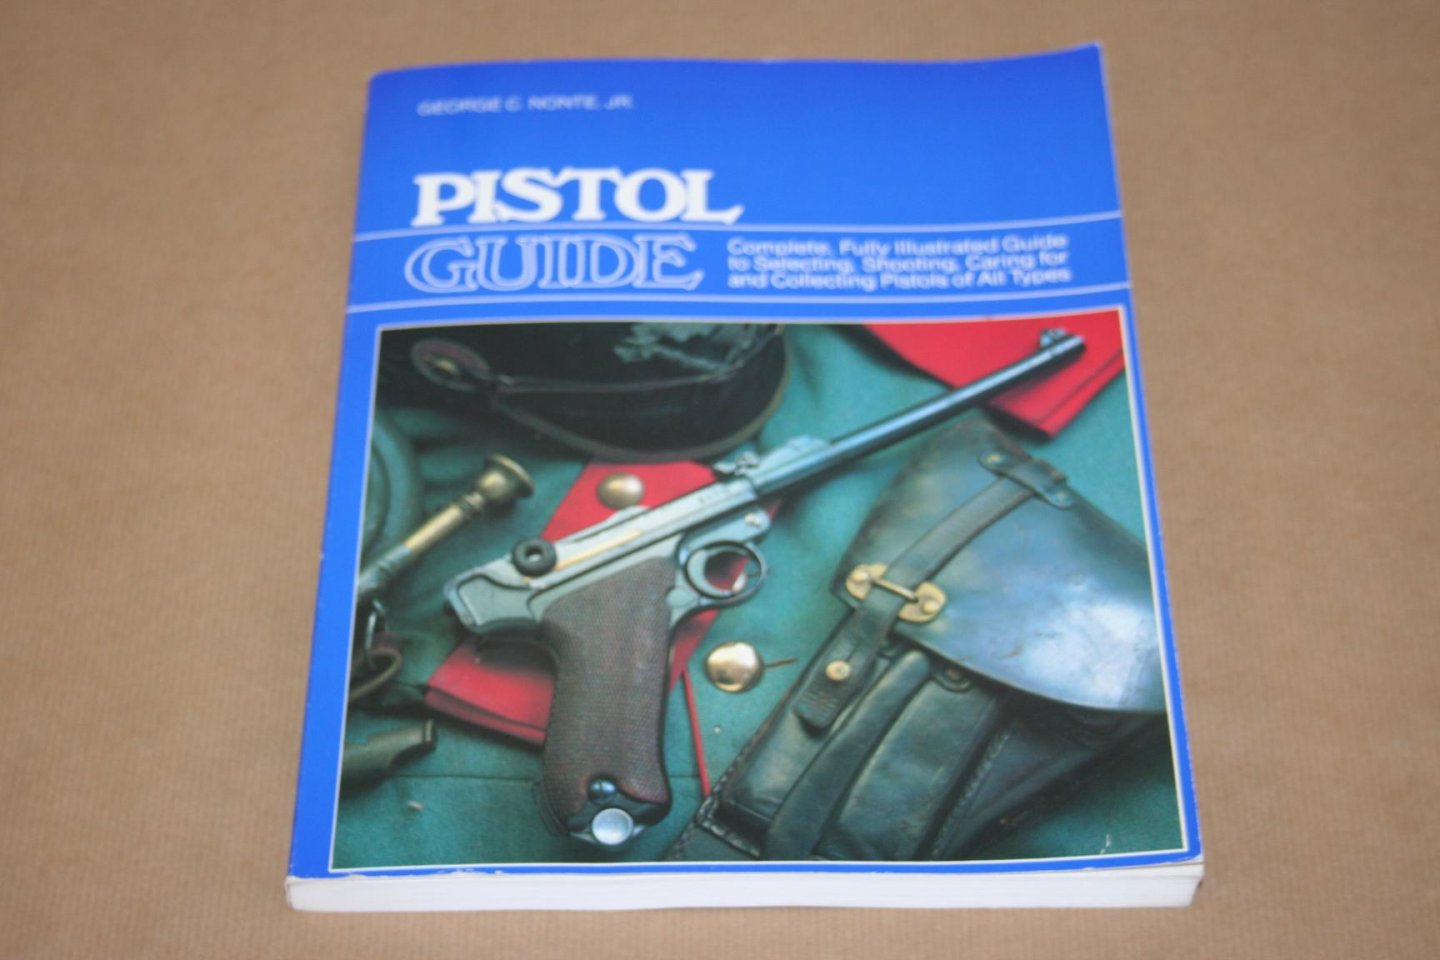 George C. Nonte - Pistol Guide -- Complete fully illustrated guide to selecting, shooting, caring for and collecting pistols of all types